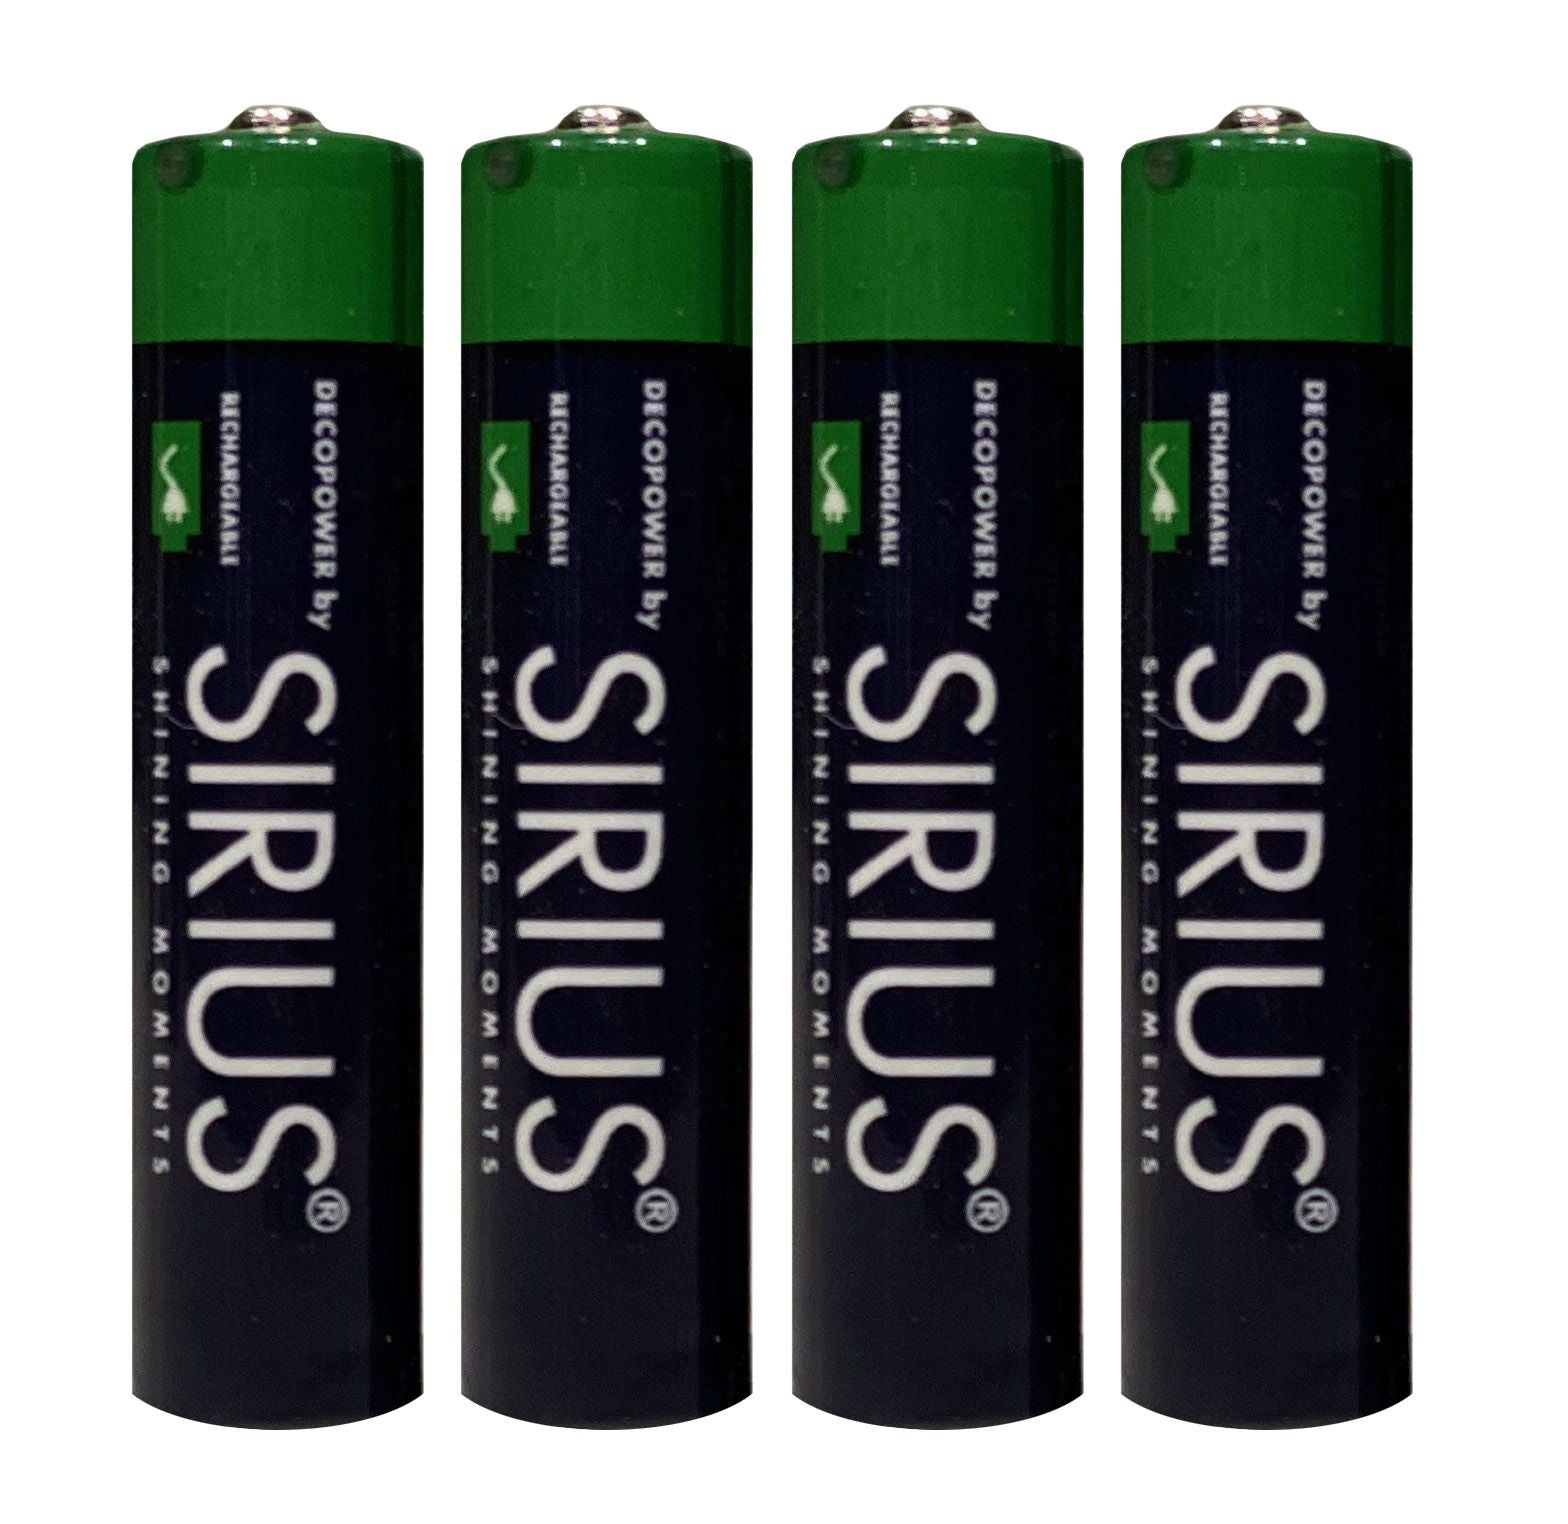 Sirius Deco Power Aaa Rechargeable Batteries, 4 Pcs Set